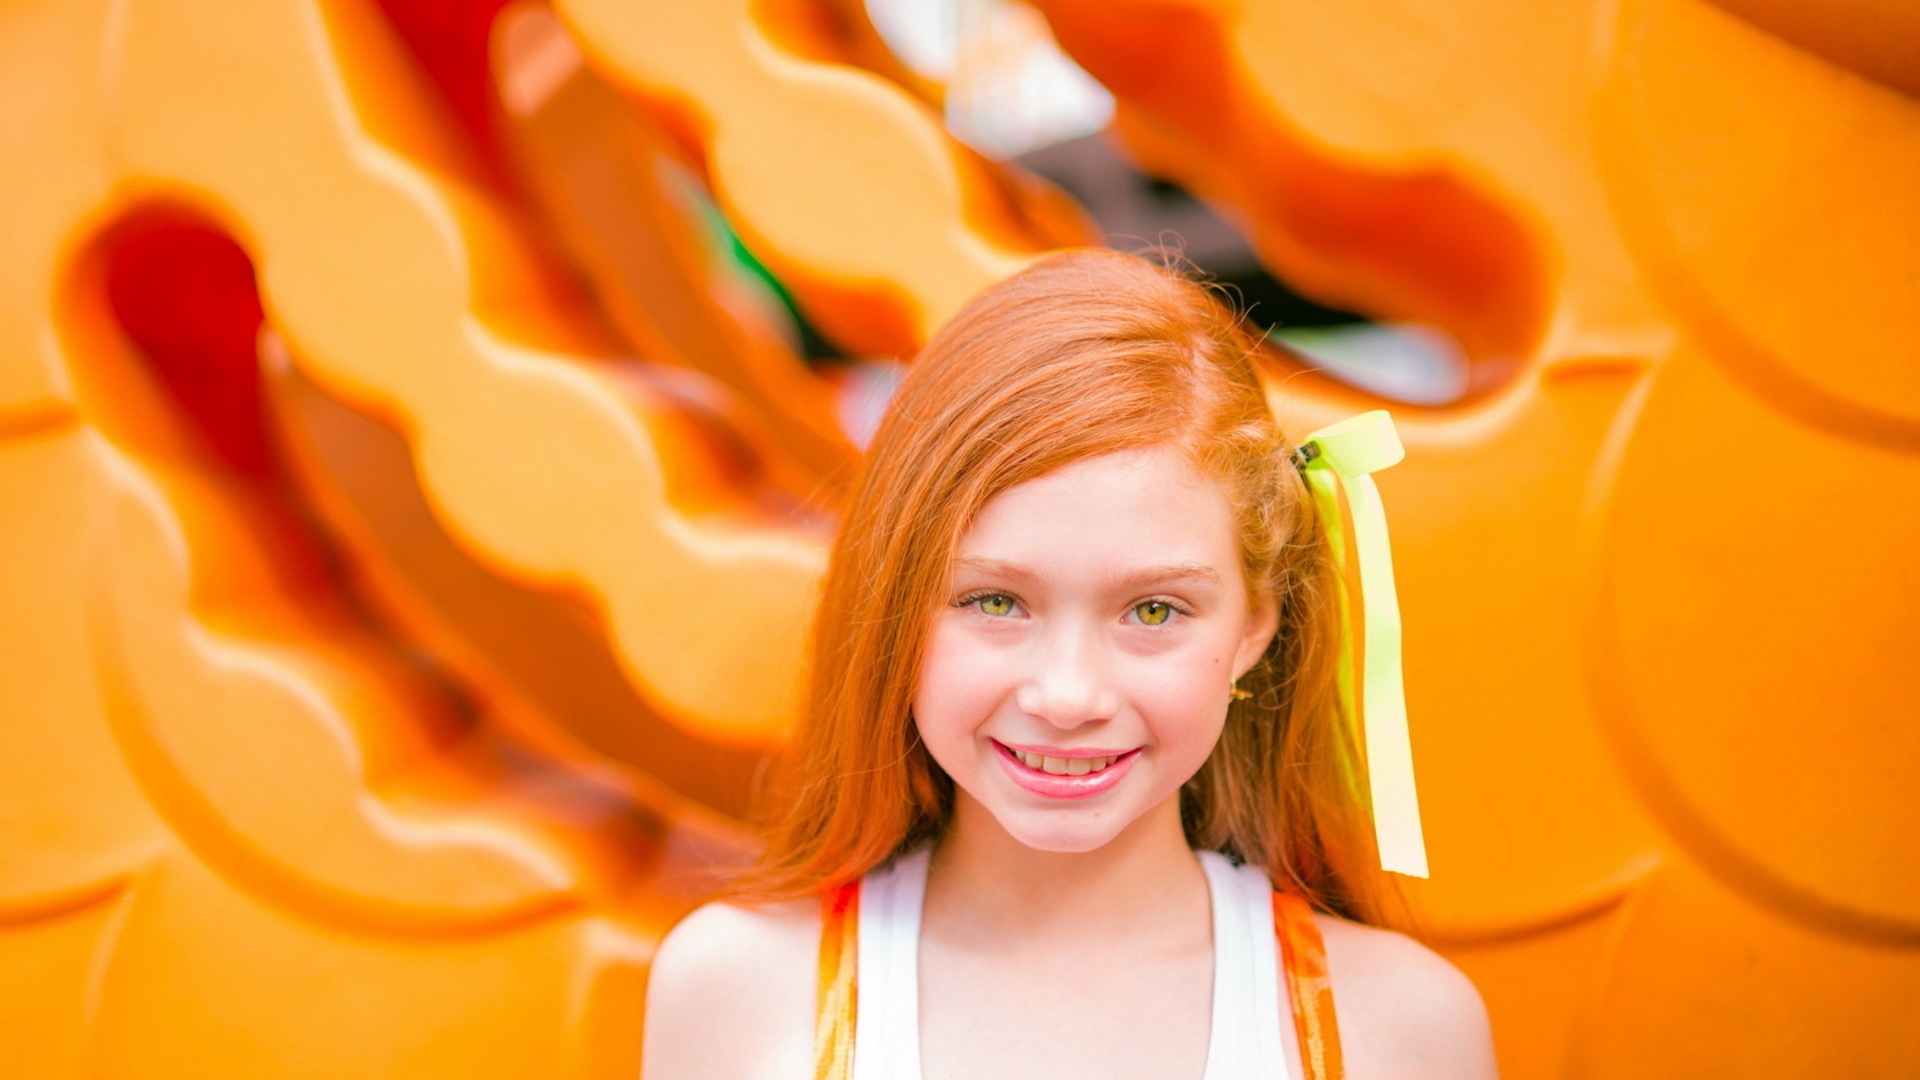 Wallpaper, redhead, red, yellow, orange, hair, color, child, flower, girl, beauty, smile, hand, lady, look, fun, blond, hairstyle, sweetness, facial expression 1920x1080